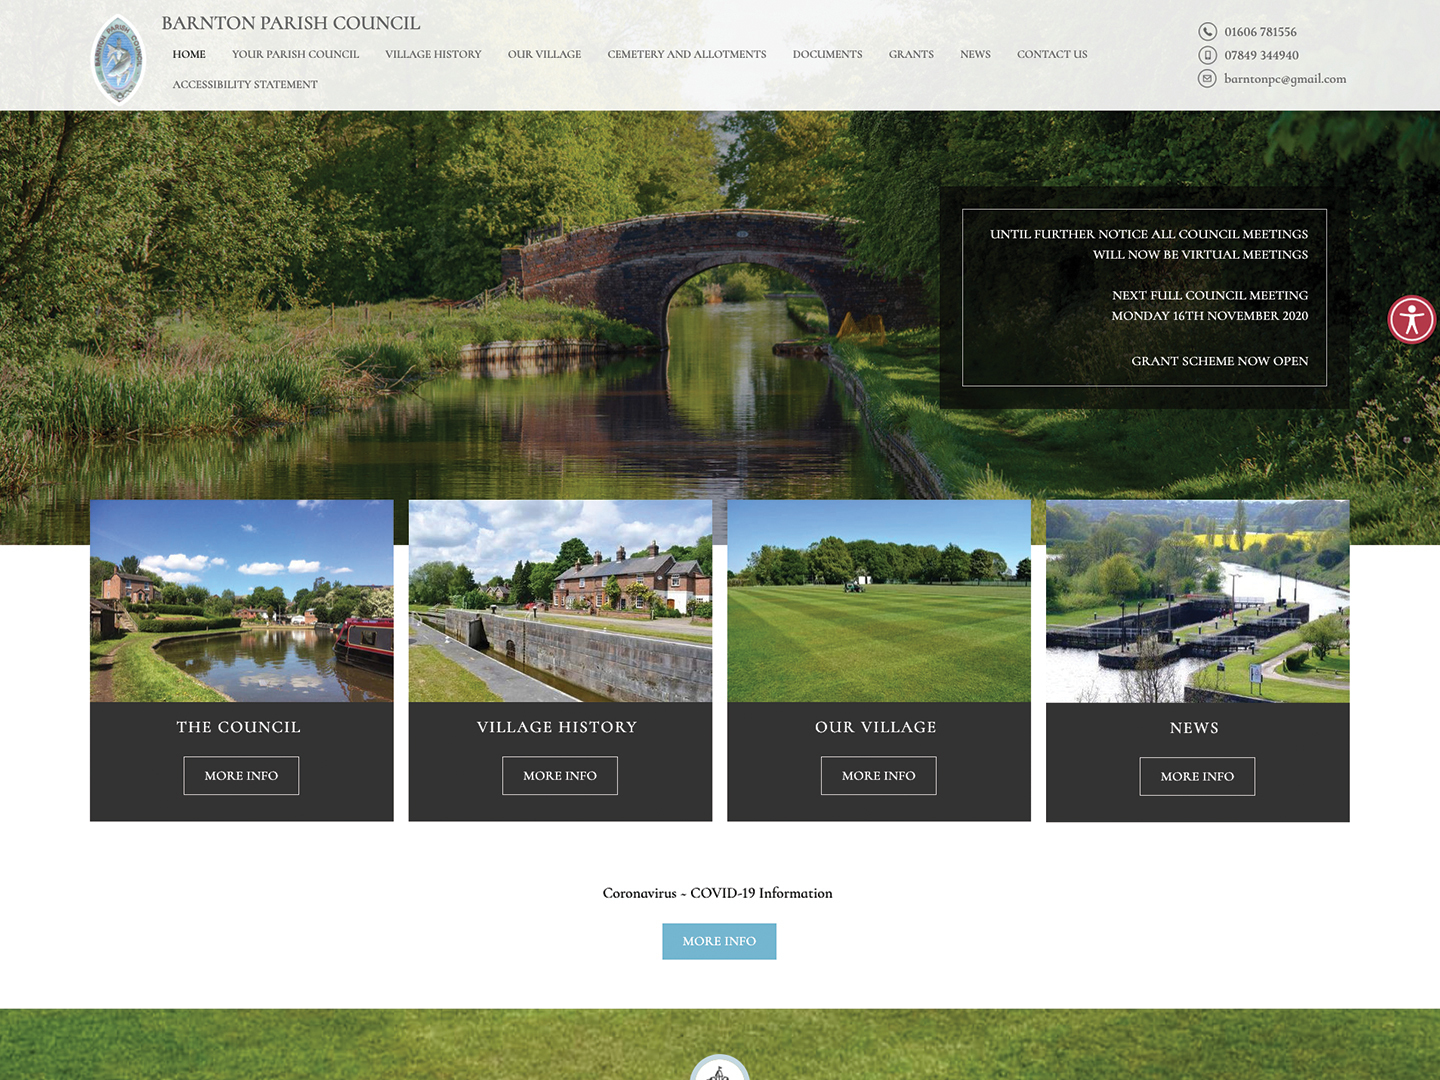 The Barnton parish council website, created by it'seeze